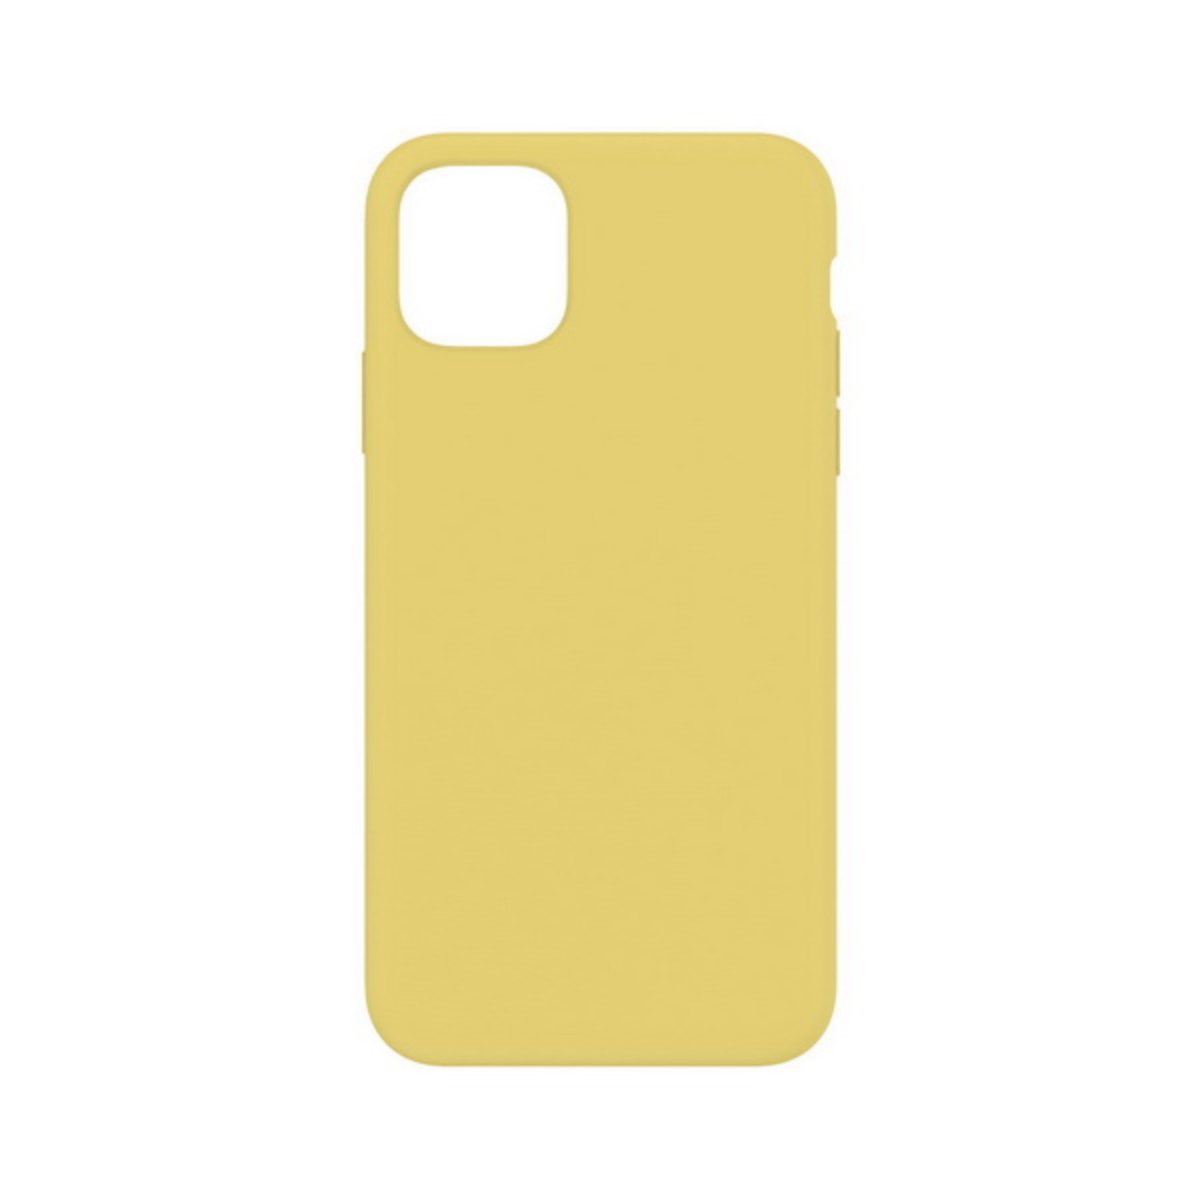 Heal Case for iPhone 11 Pro Max (Yellow) CASEPHONE11PROMAX YL